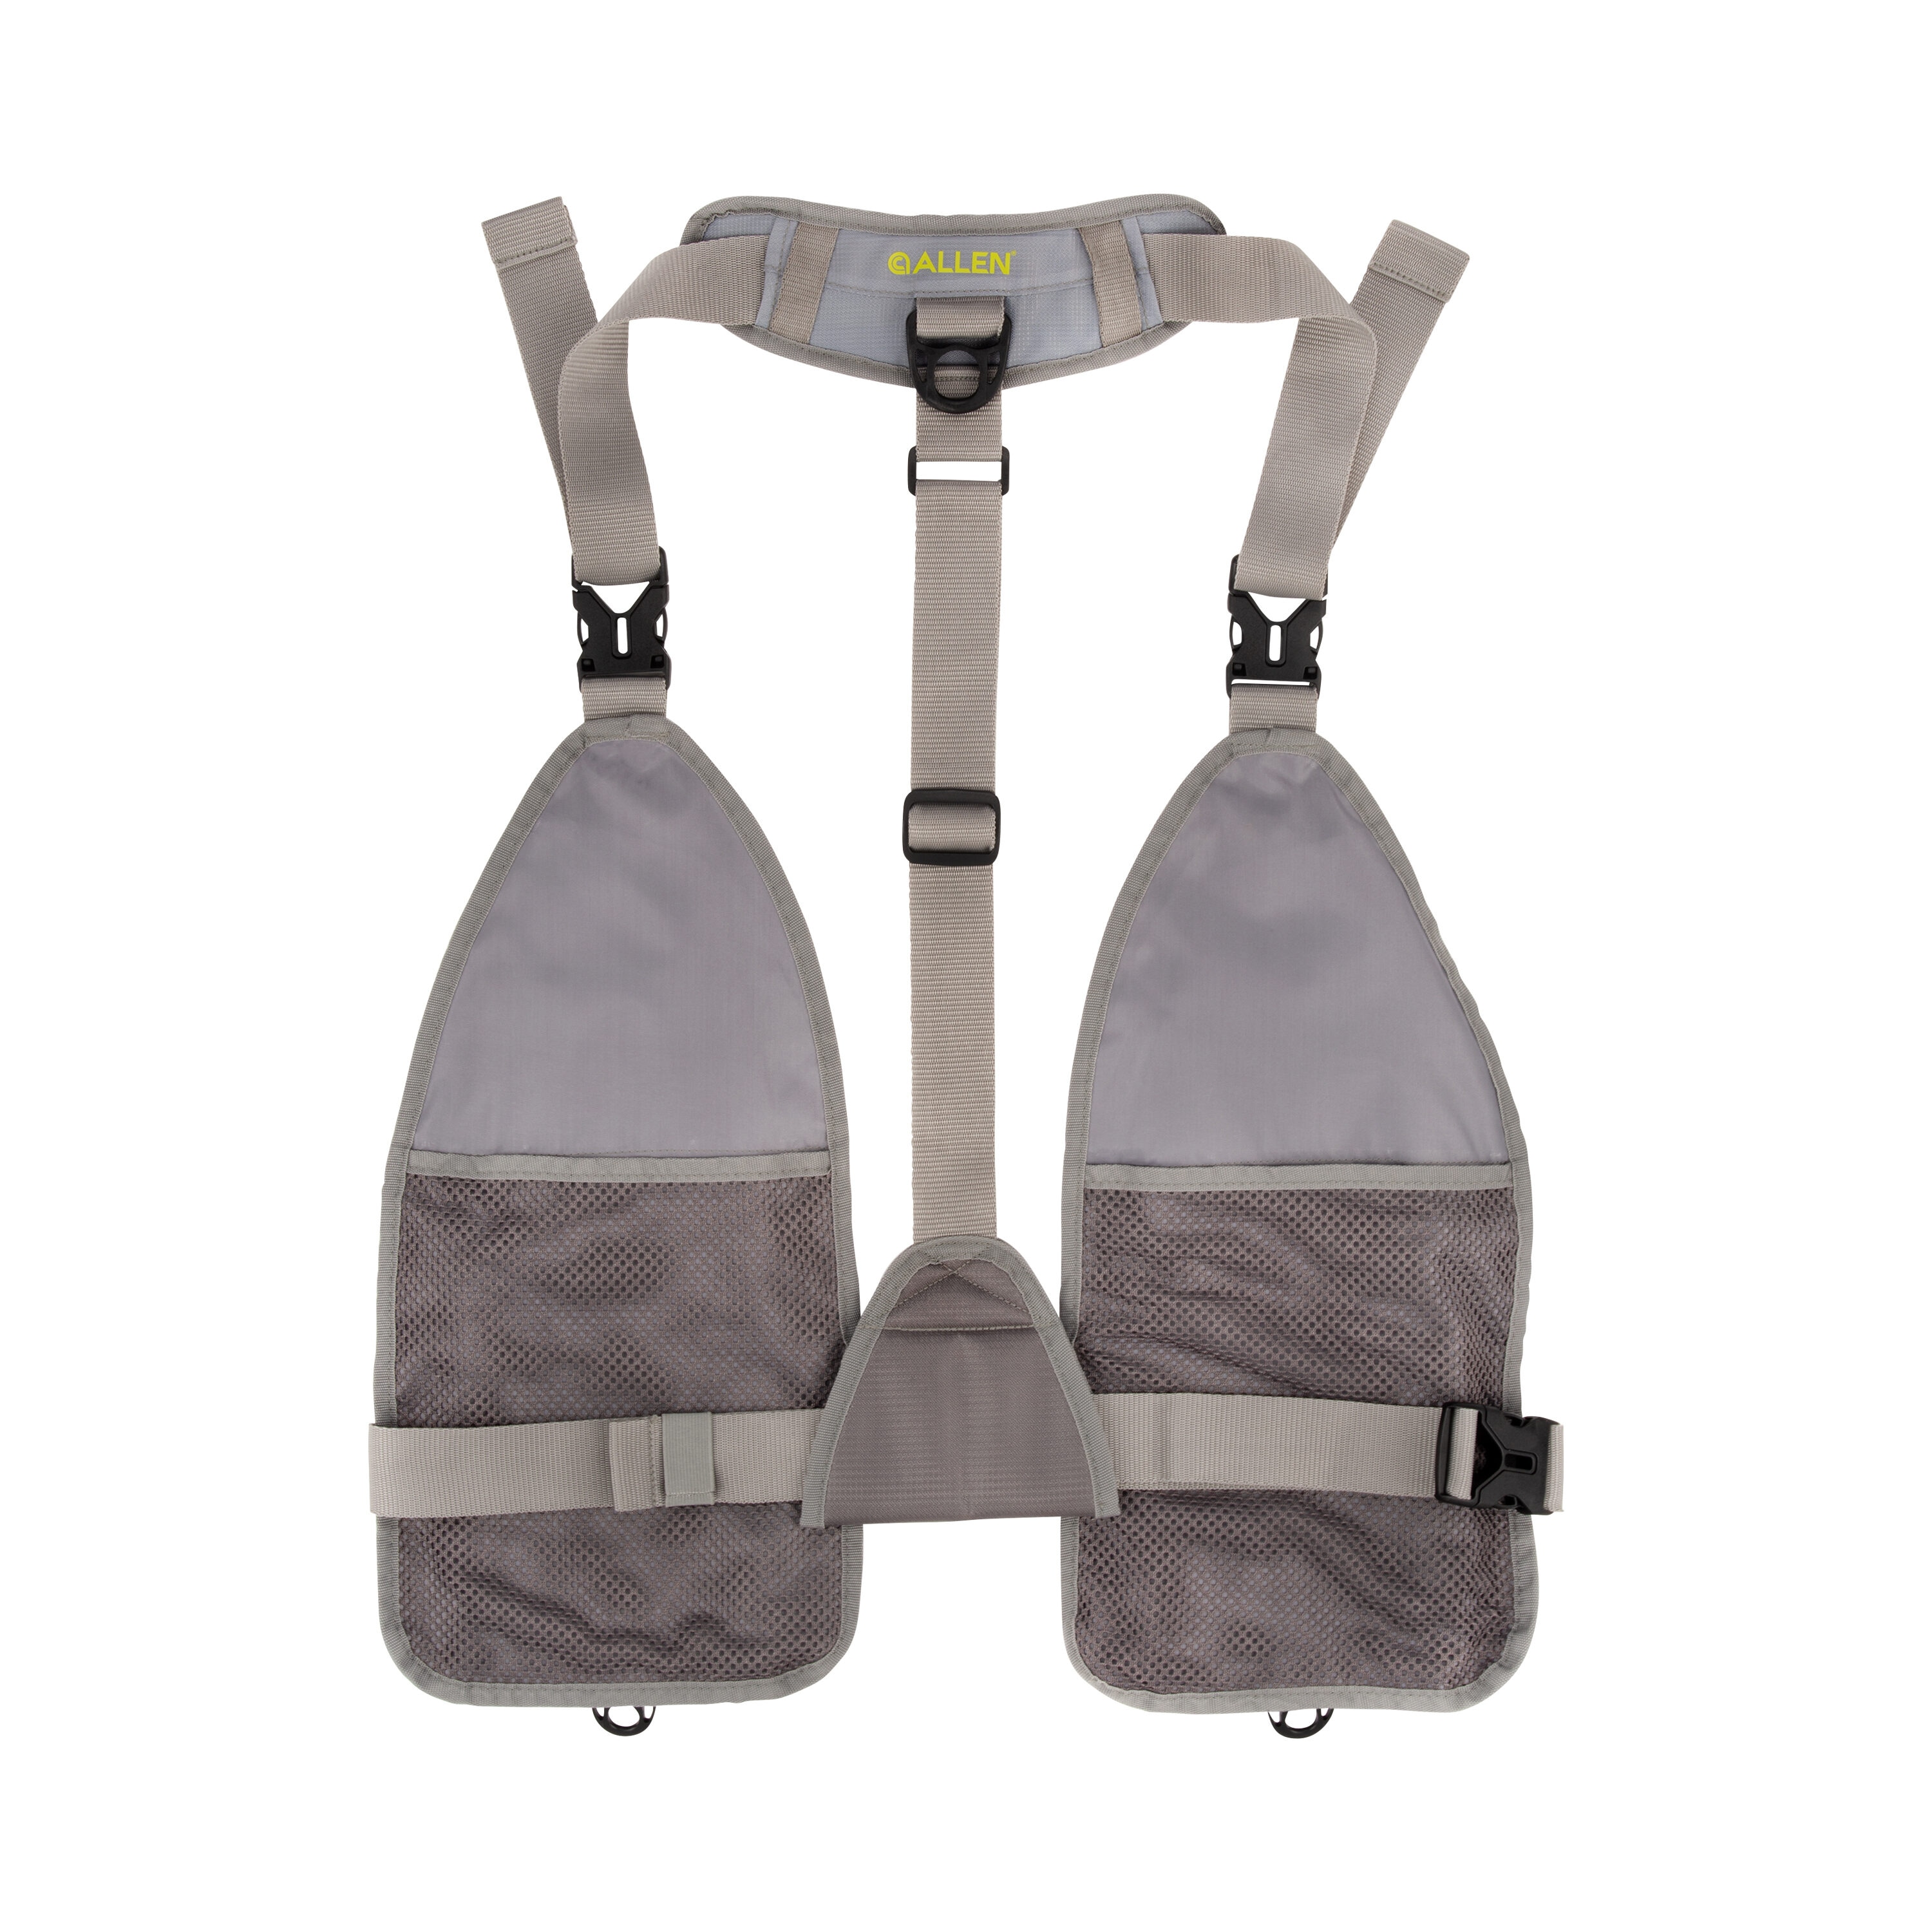 Ultra-Light Gallatin Strap Fly Fishing Vest, Fits up to 4 Tackle/Fly Boxes,  14 Accessory Pockets